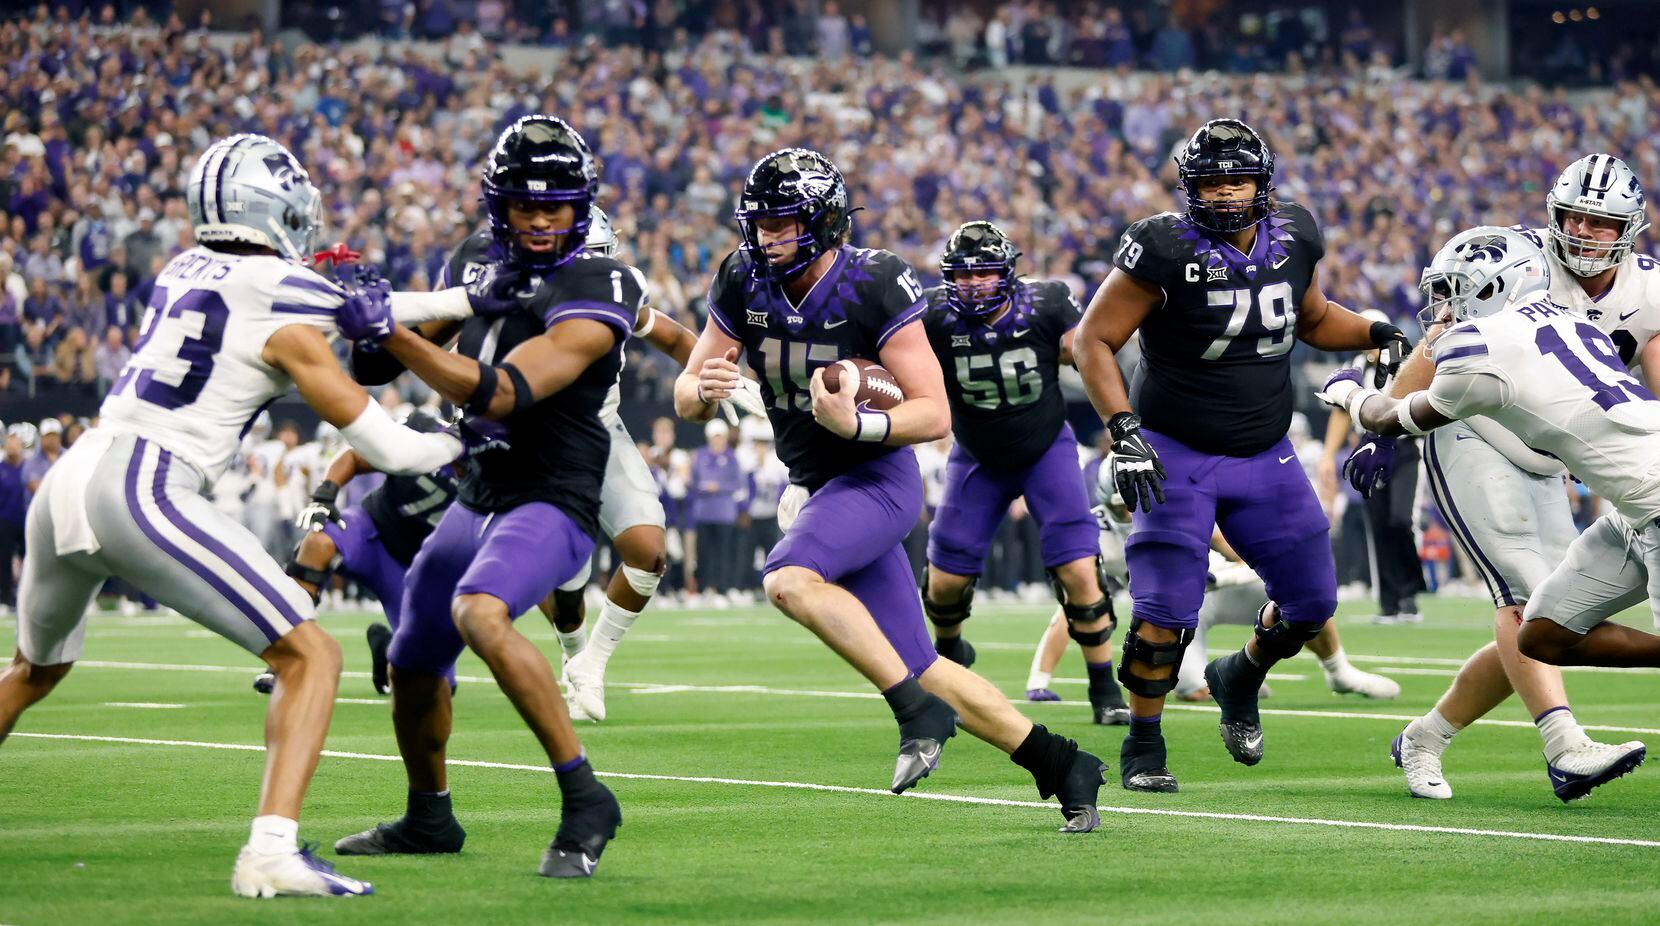 TCU Horned Frogs quarterback Max Duggan (15) keeps the ball and scores a touchdown late in...